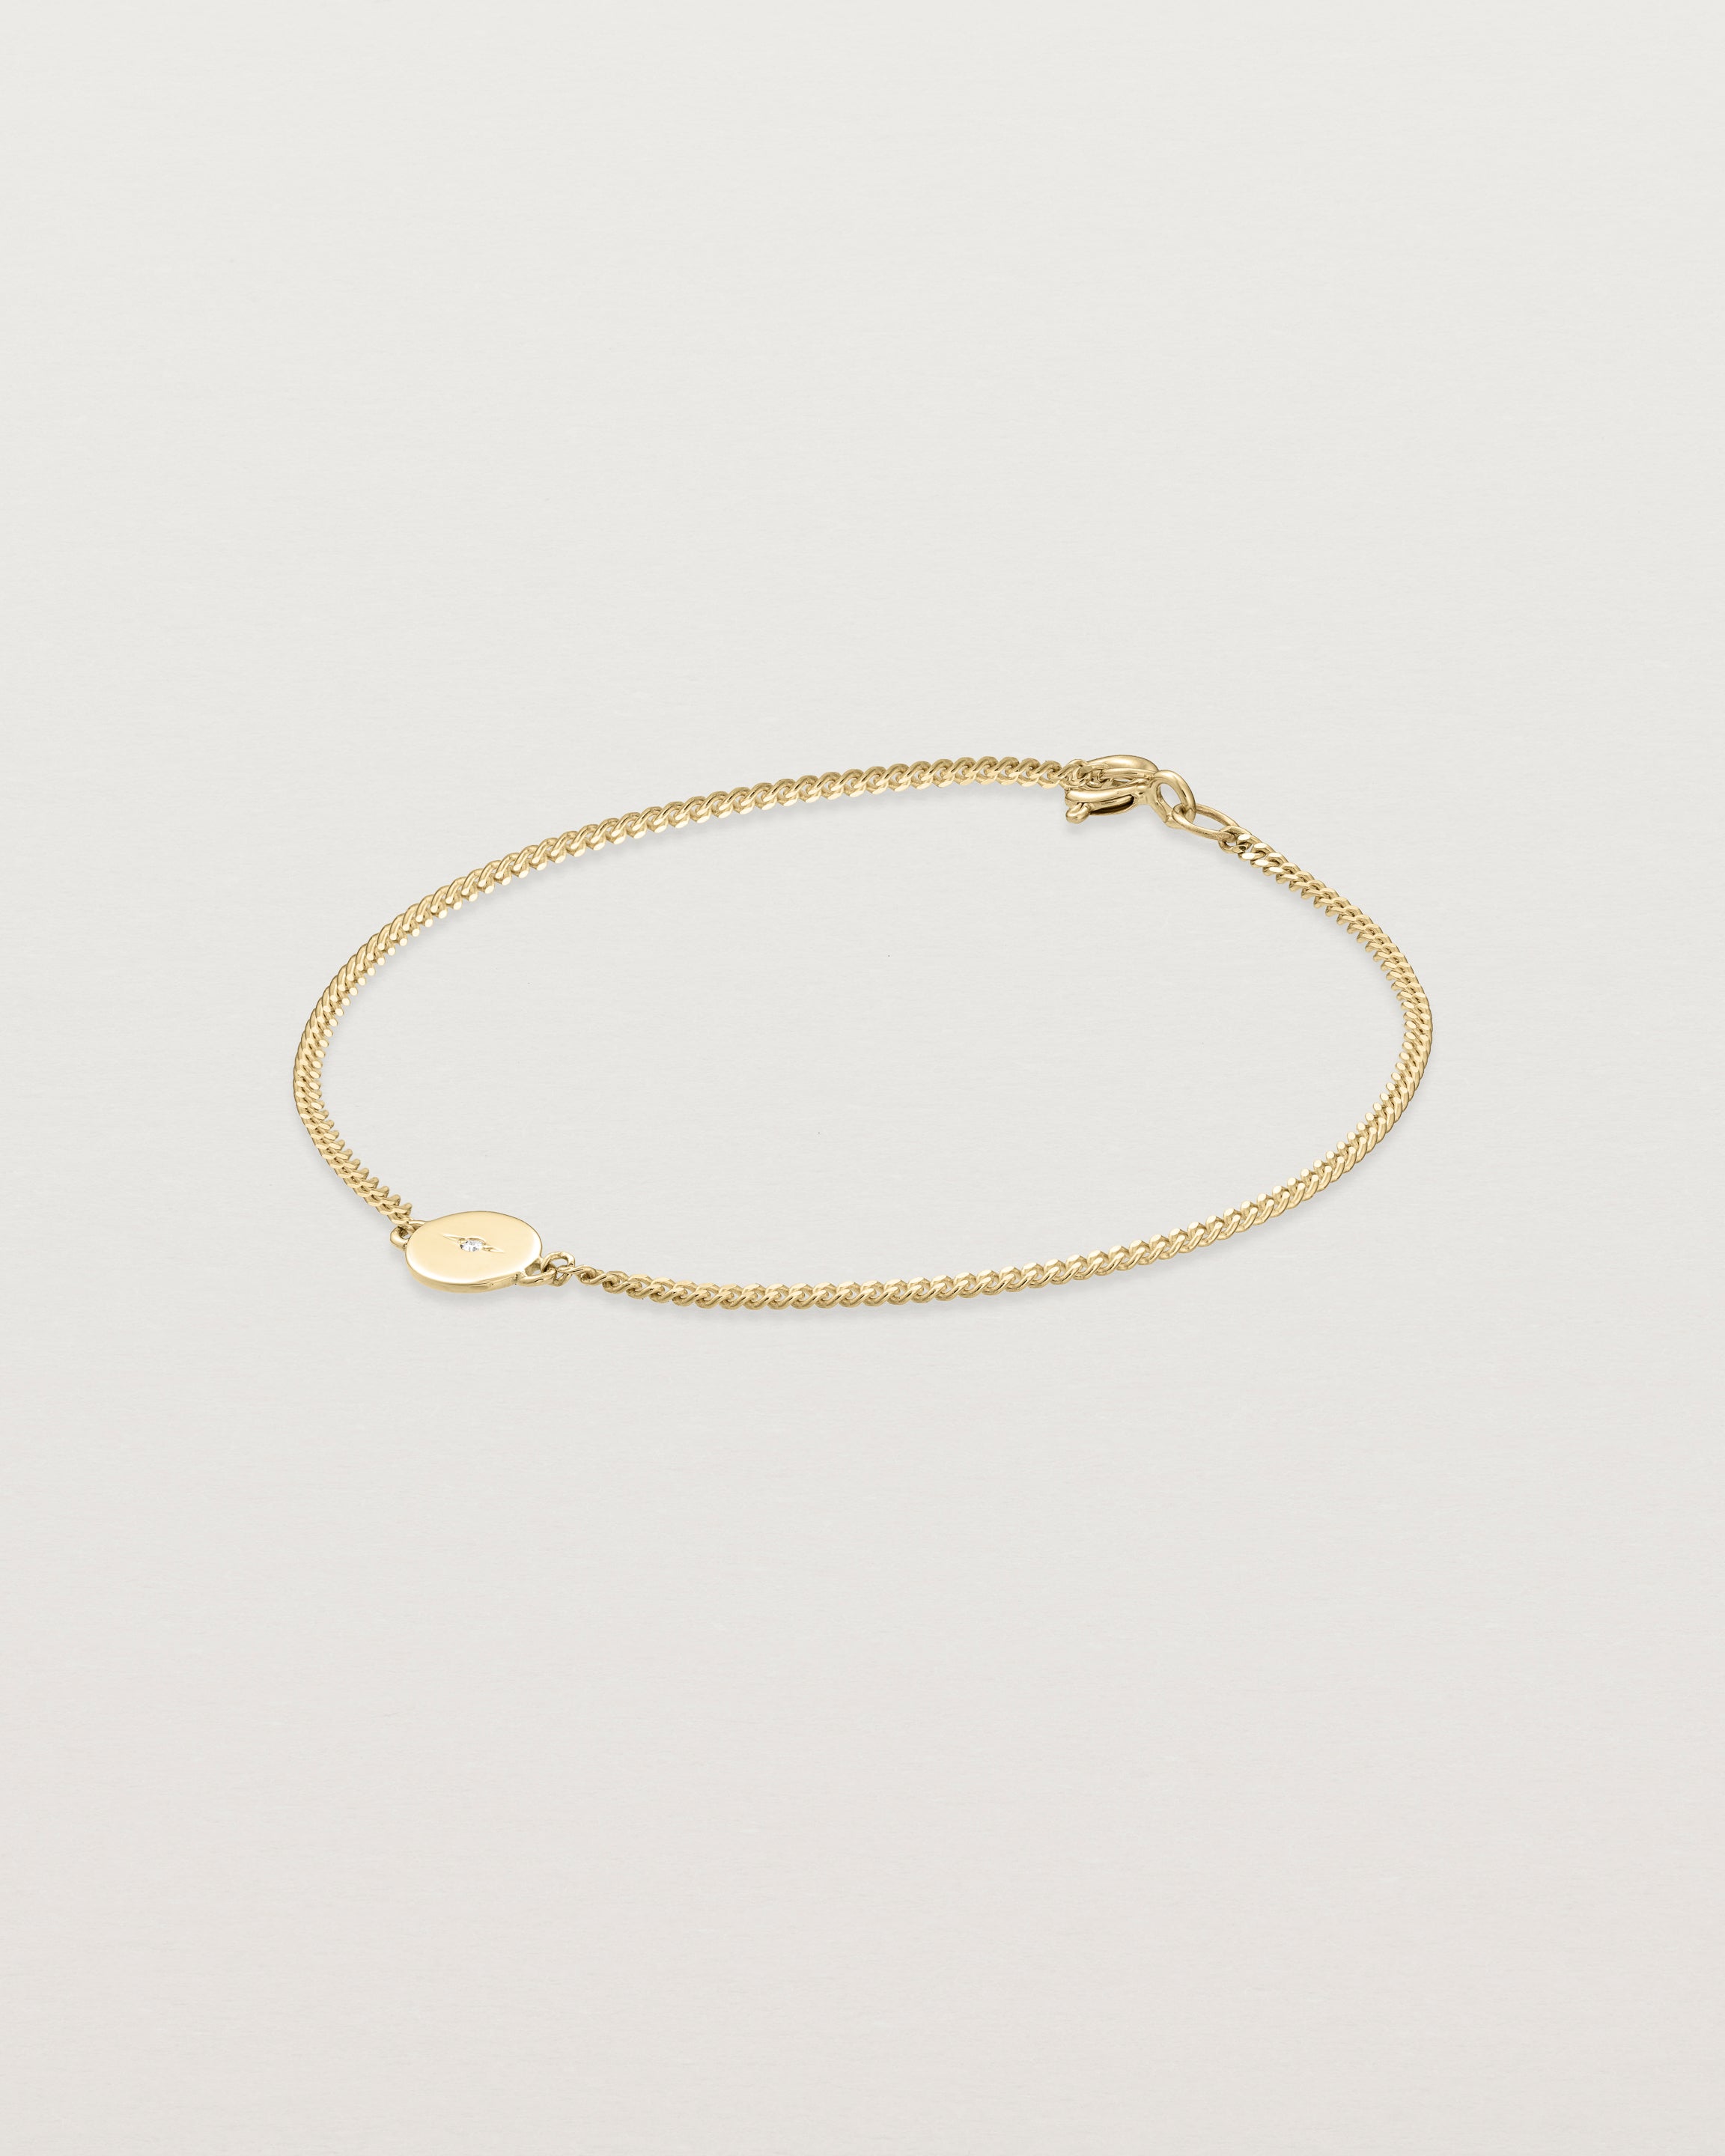 The Eily Bracelet | Birthstone in yellow gold.